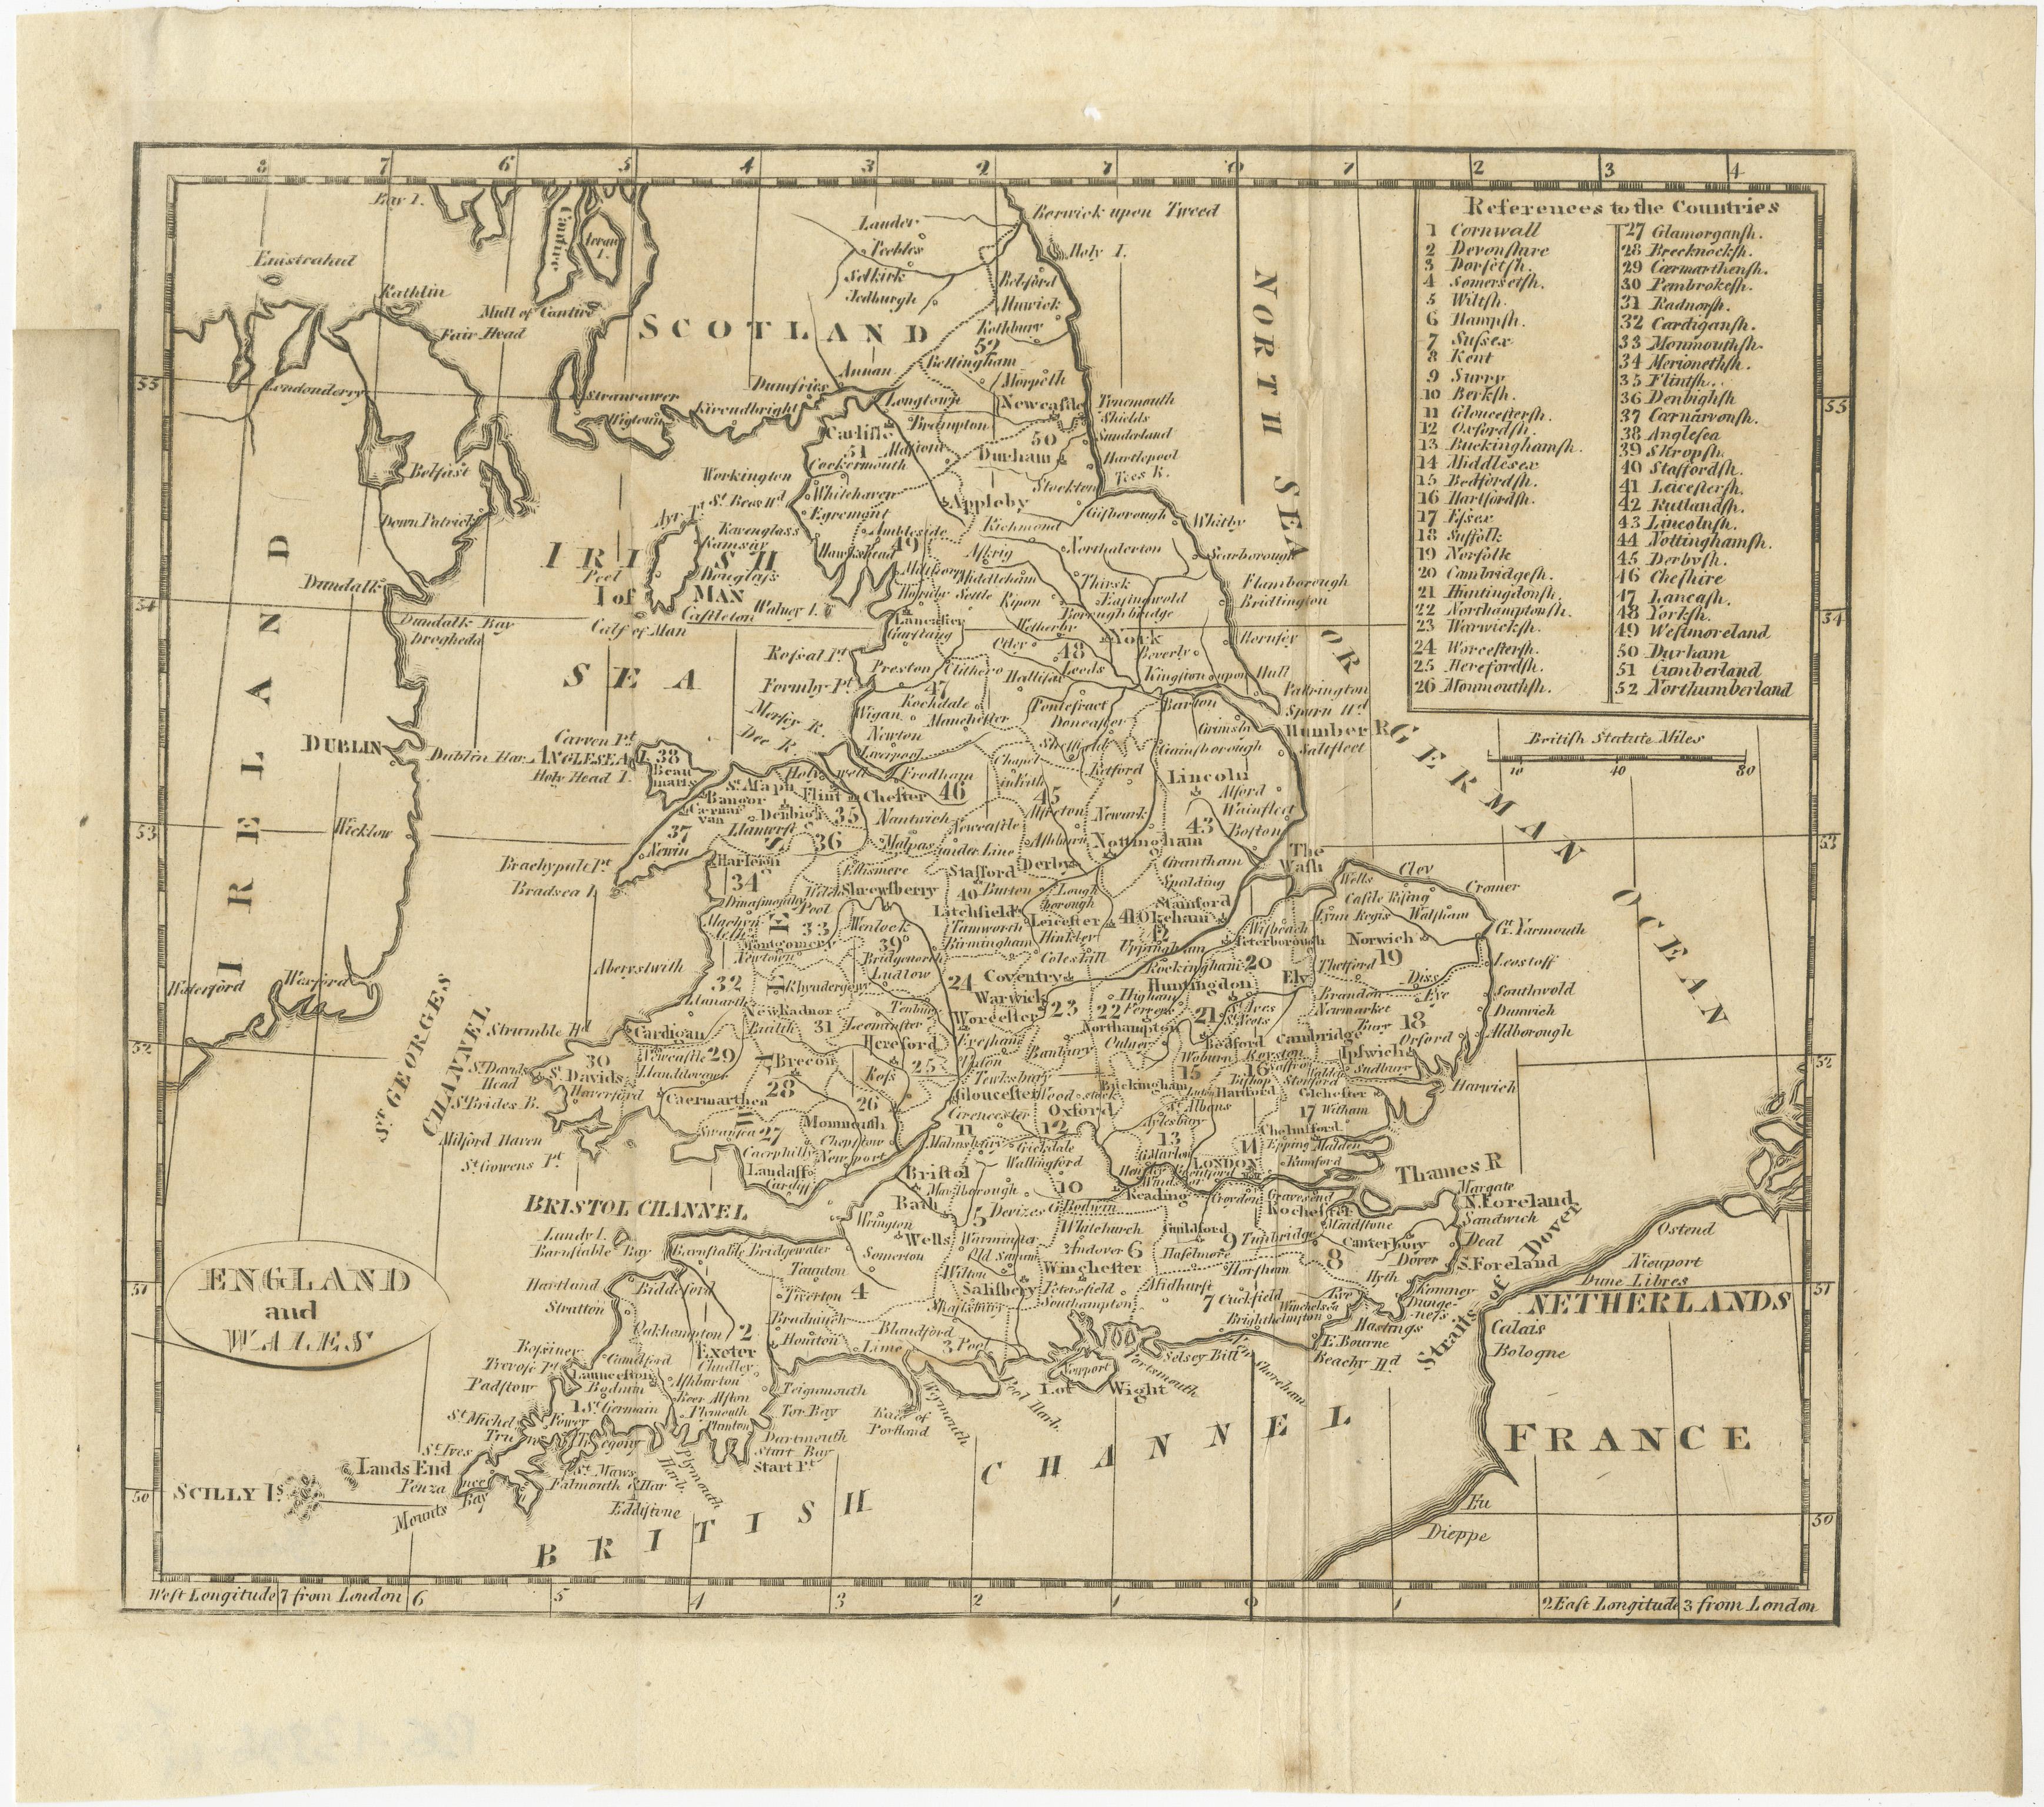 Antique map titled 'England and Wales'. Original antique map of England and Wales, with references to the counties. Source unknown, to be determined. Published circa 1820.